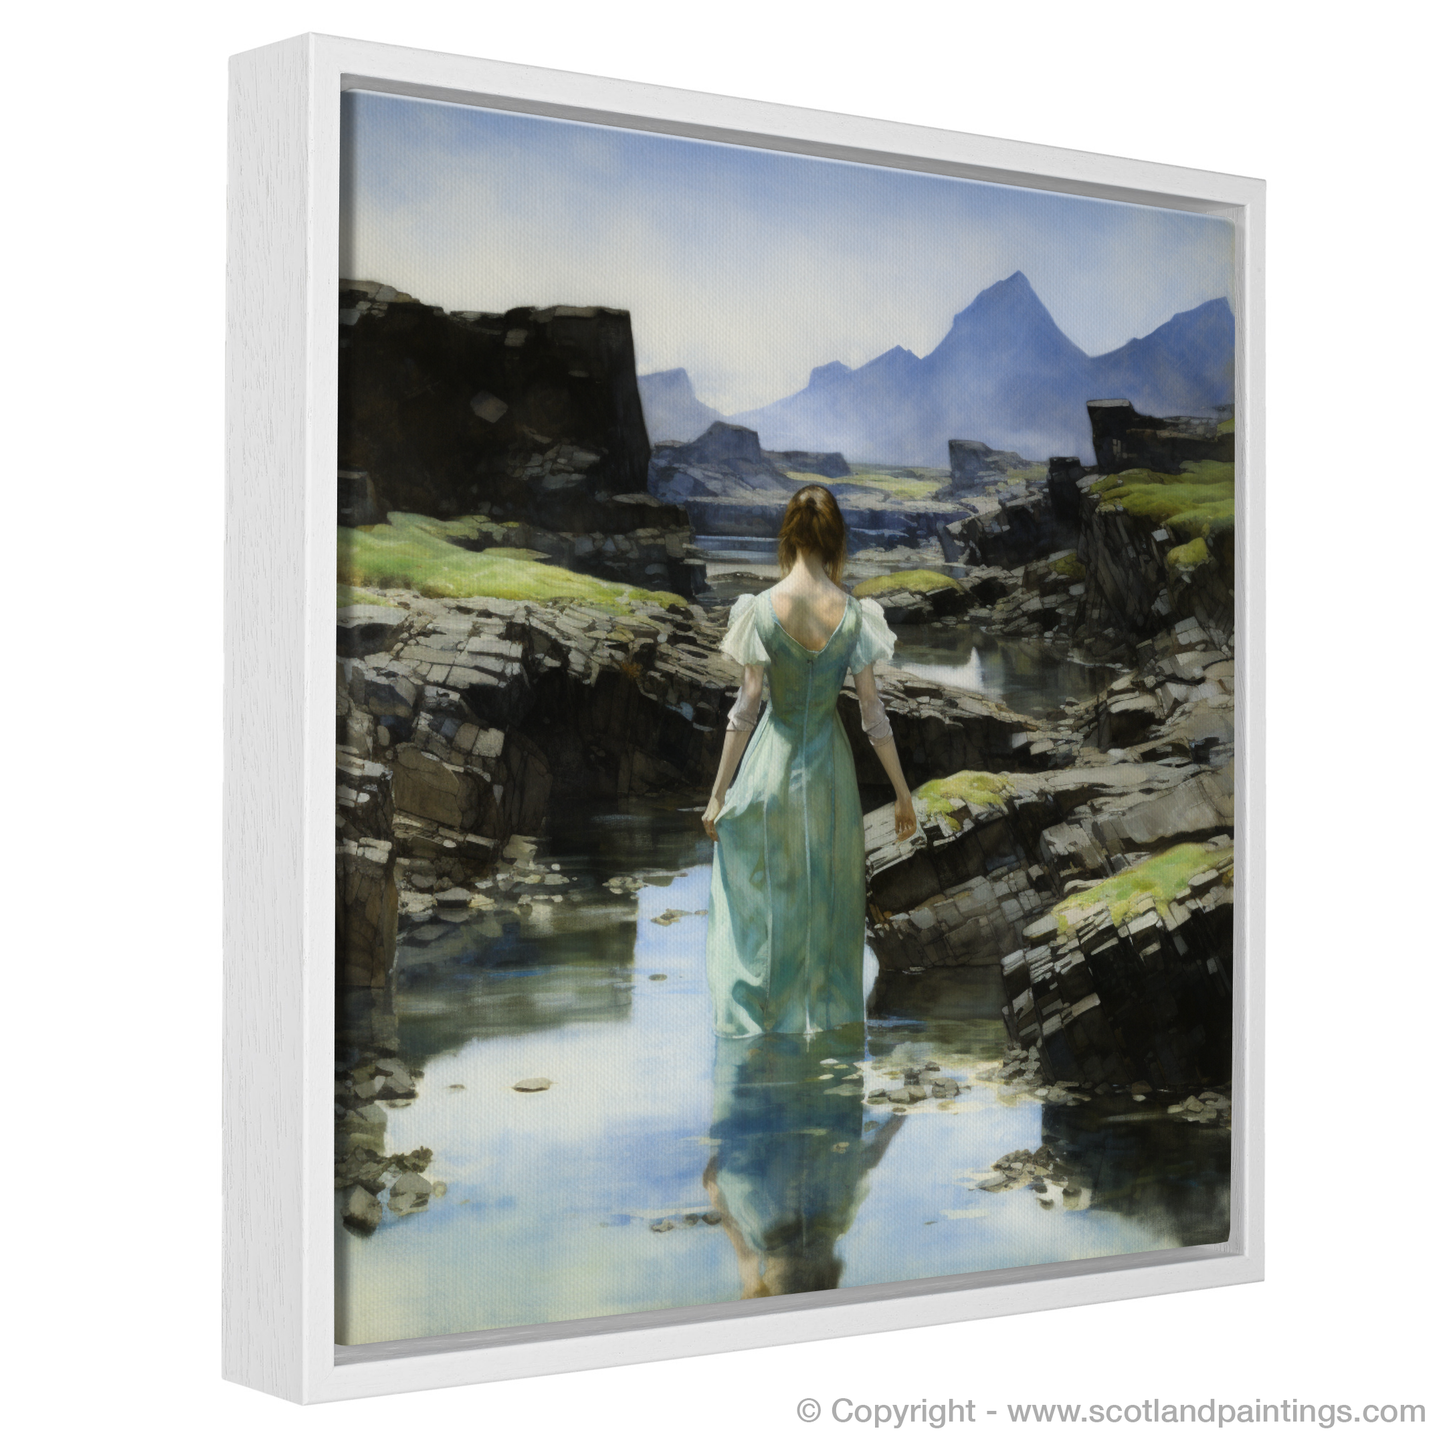 Ethereal Elegance at the Fairy Pools